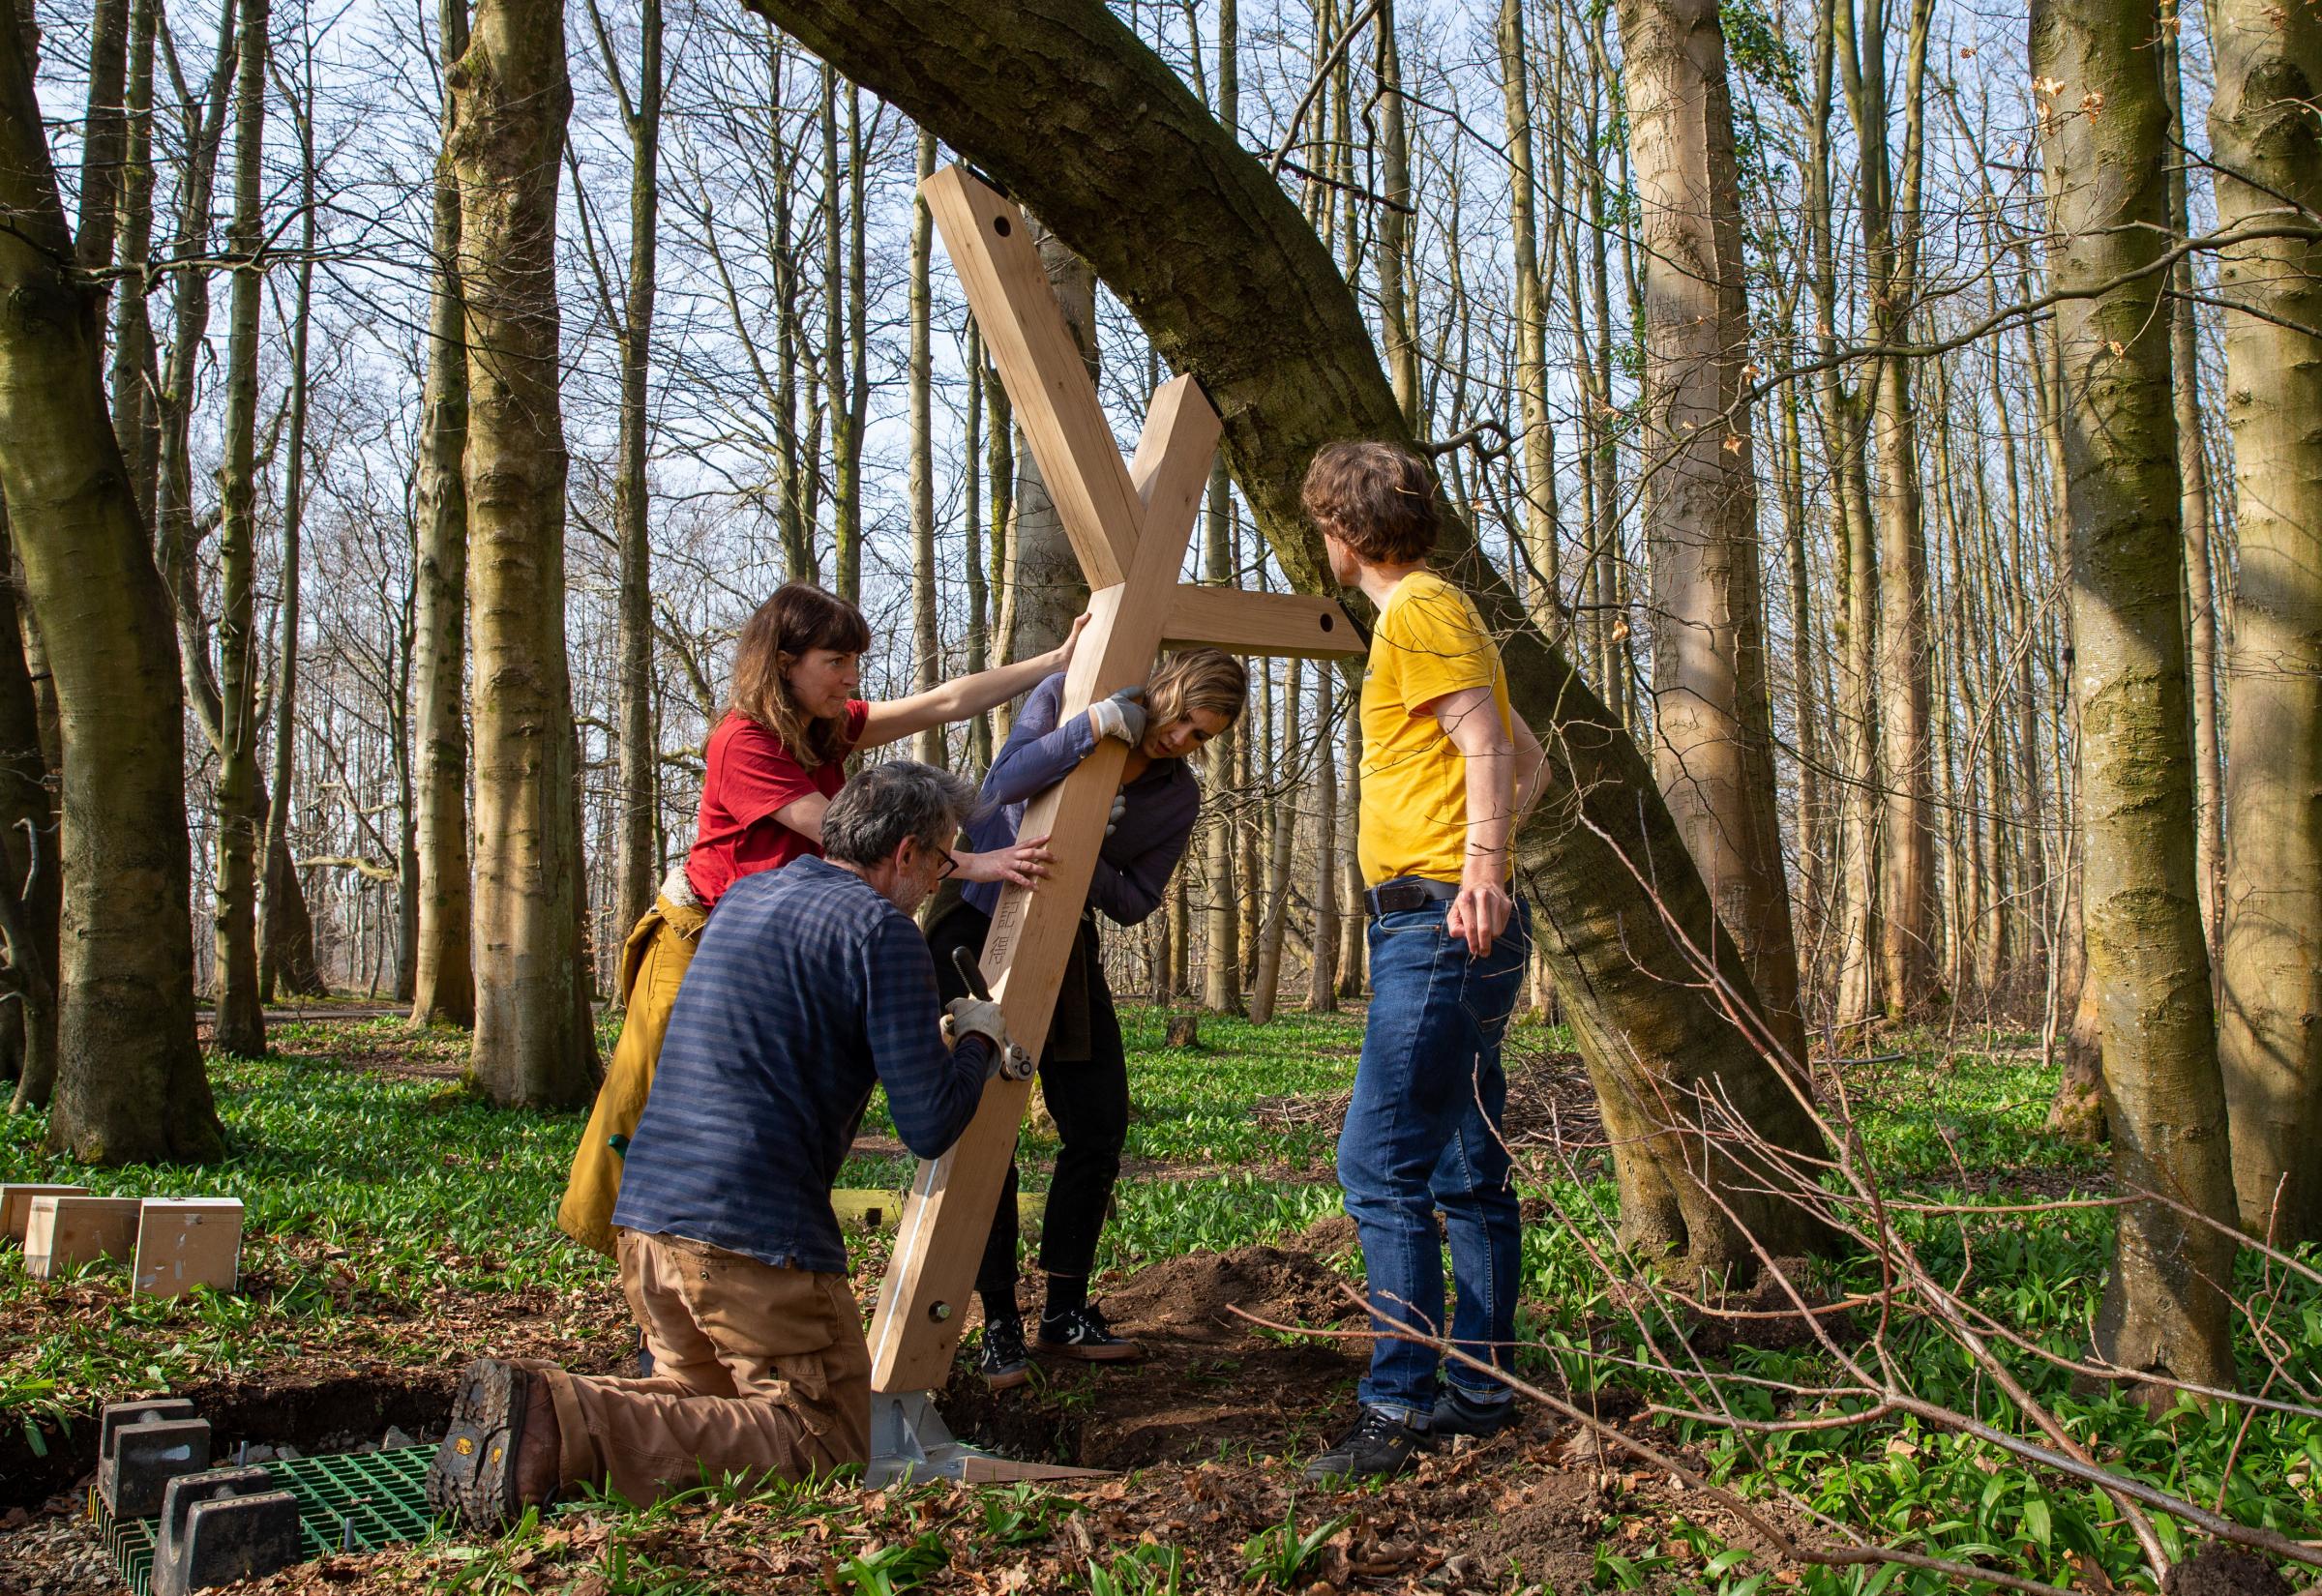 Artist Alec Finlay, at right, installing the first of the Covid memorial tree supports in Pollok Country Park. Pictured with Alec, are from left, Rachel Smith, Alastair Leitch and Kate McAllan. Photograph by Colin Mearns.